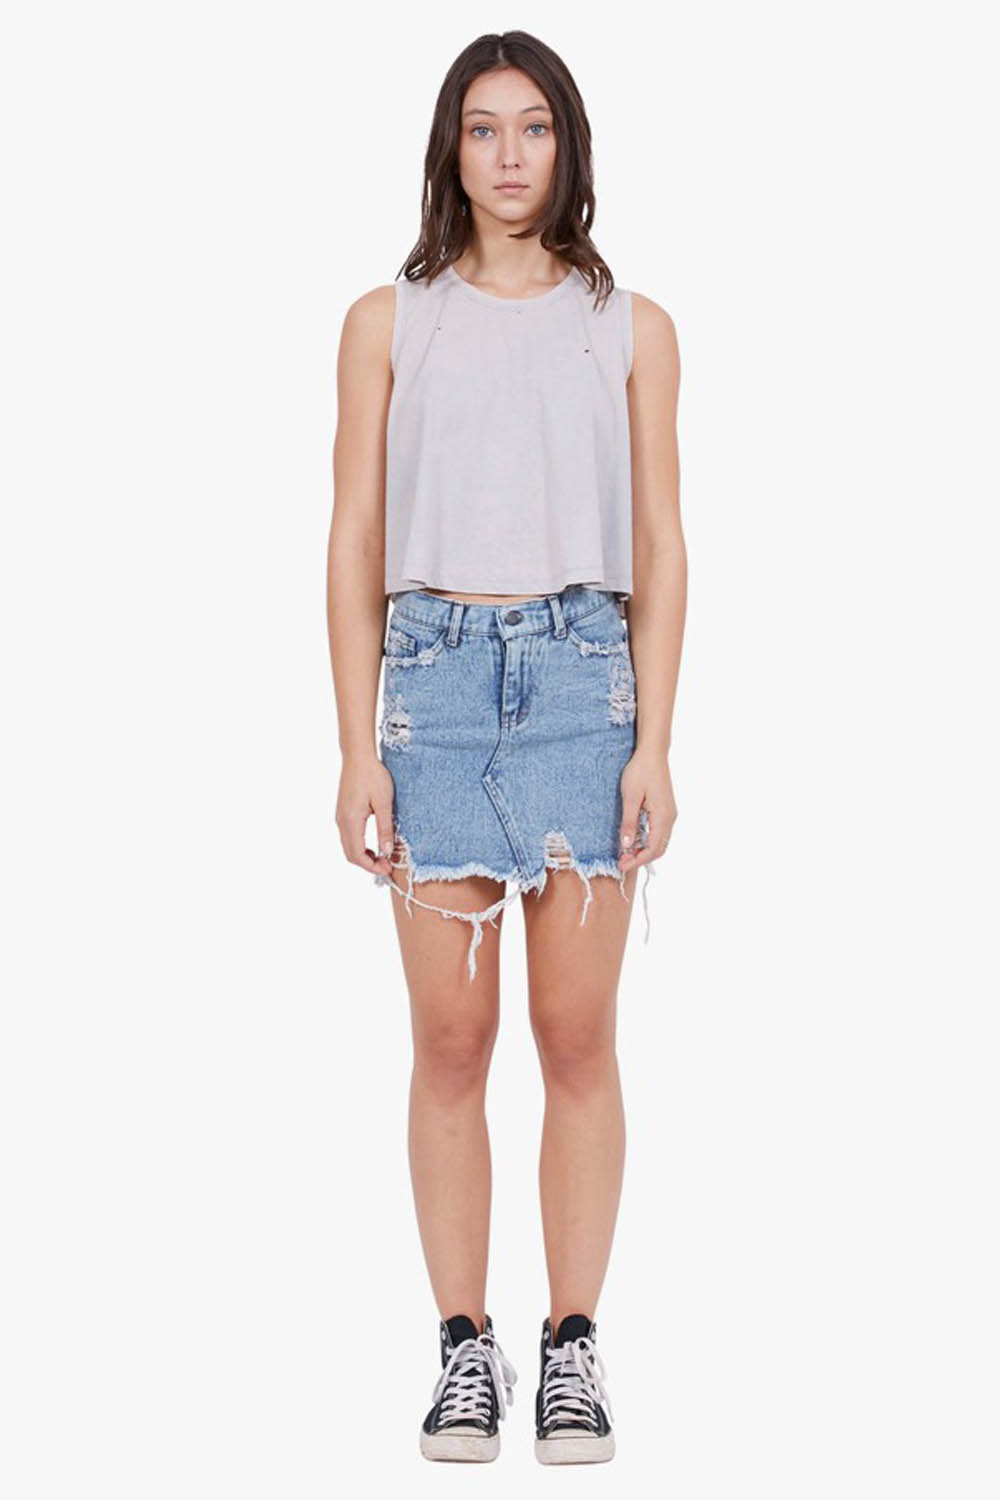 The People VS skirt, $119, from Superette.